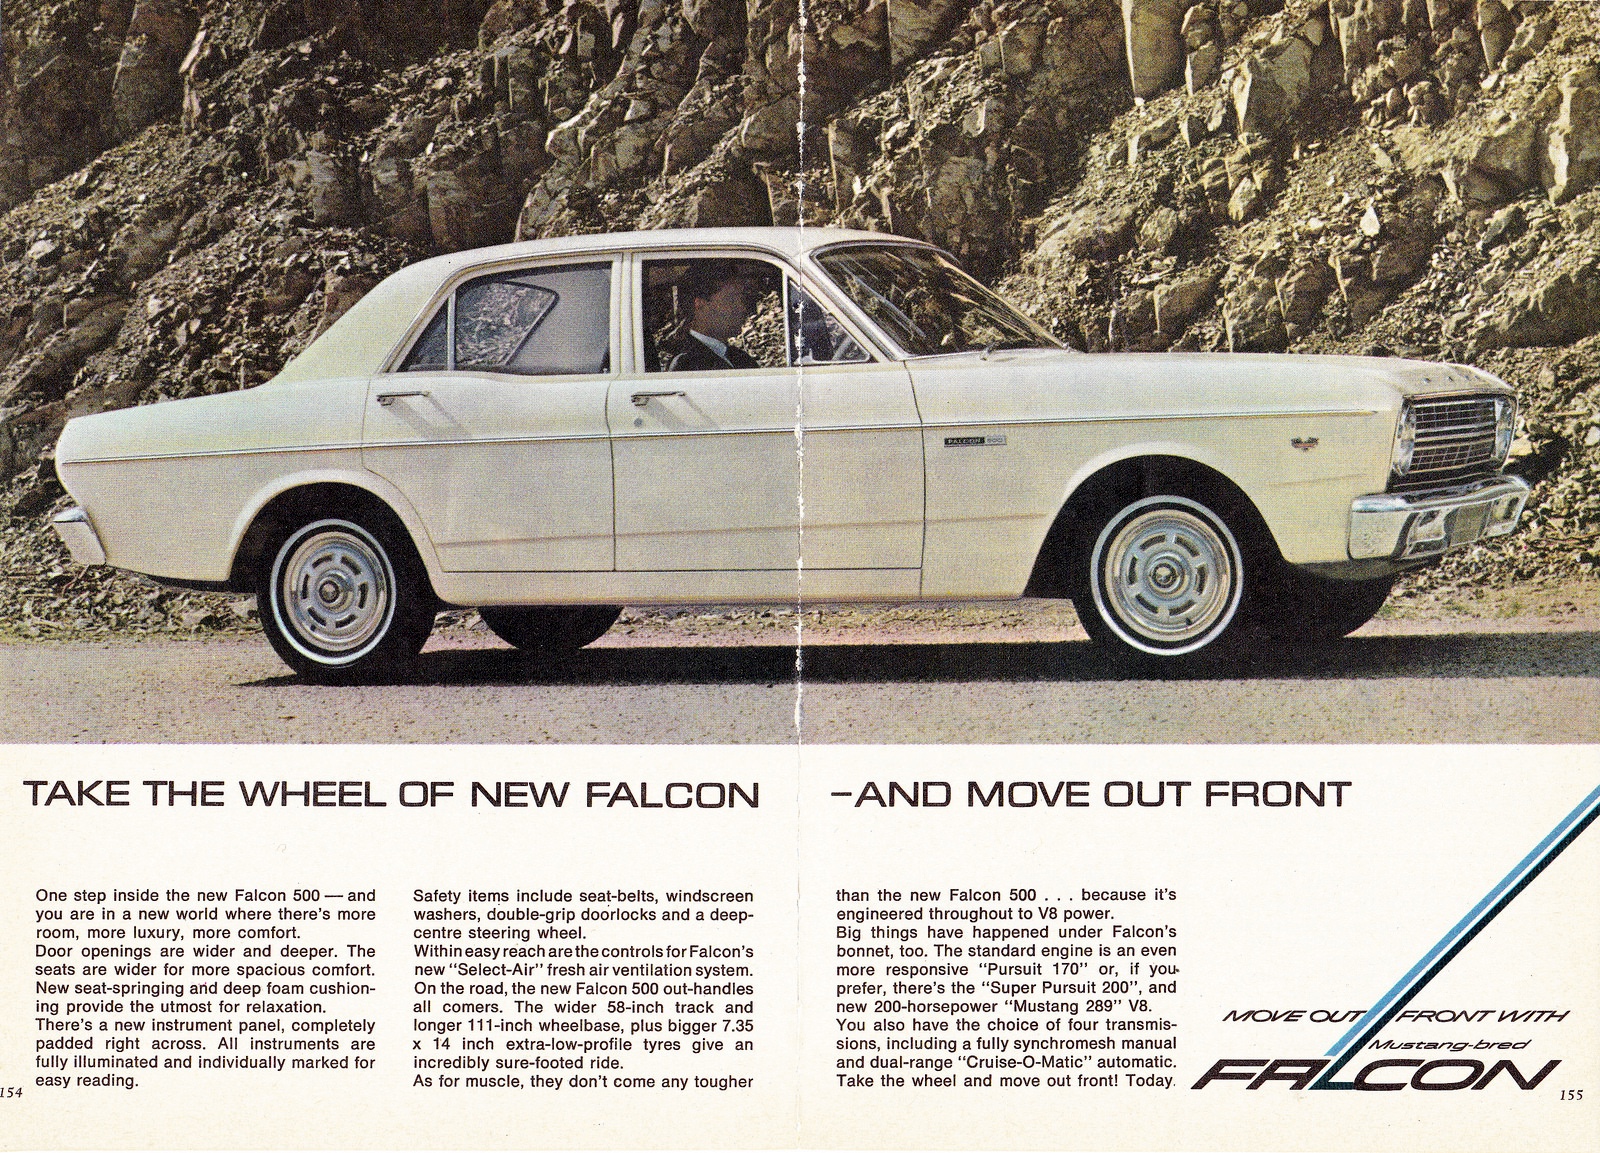 1967 Ford Falcon XR 500 Page 2 & 3